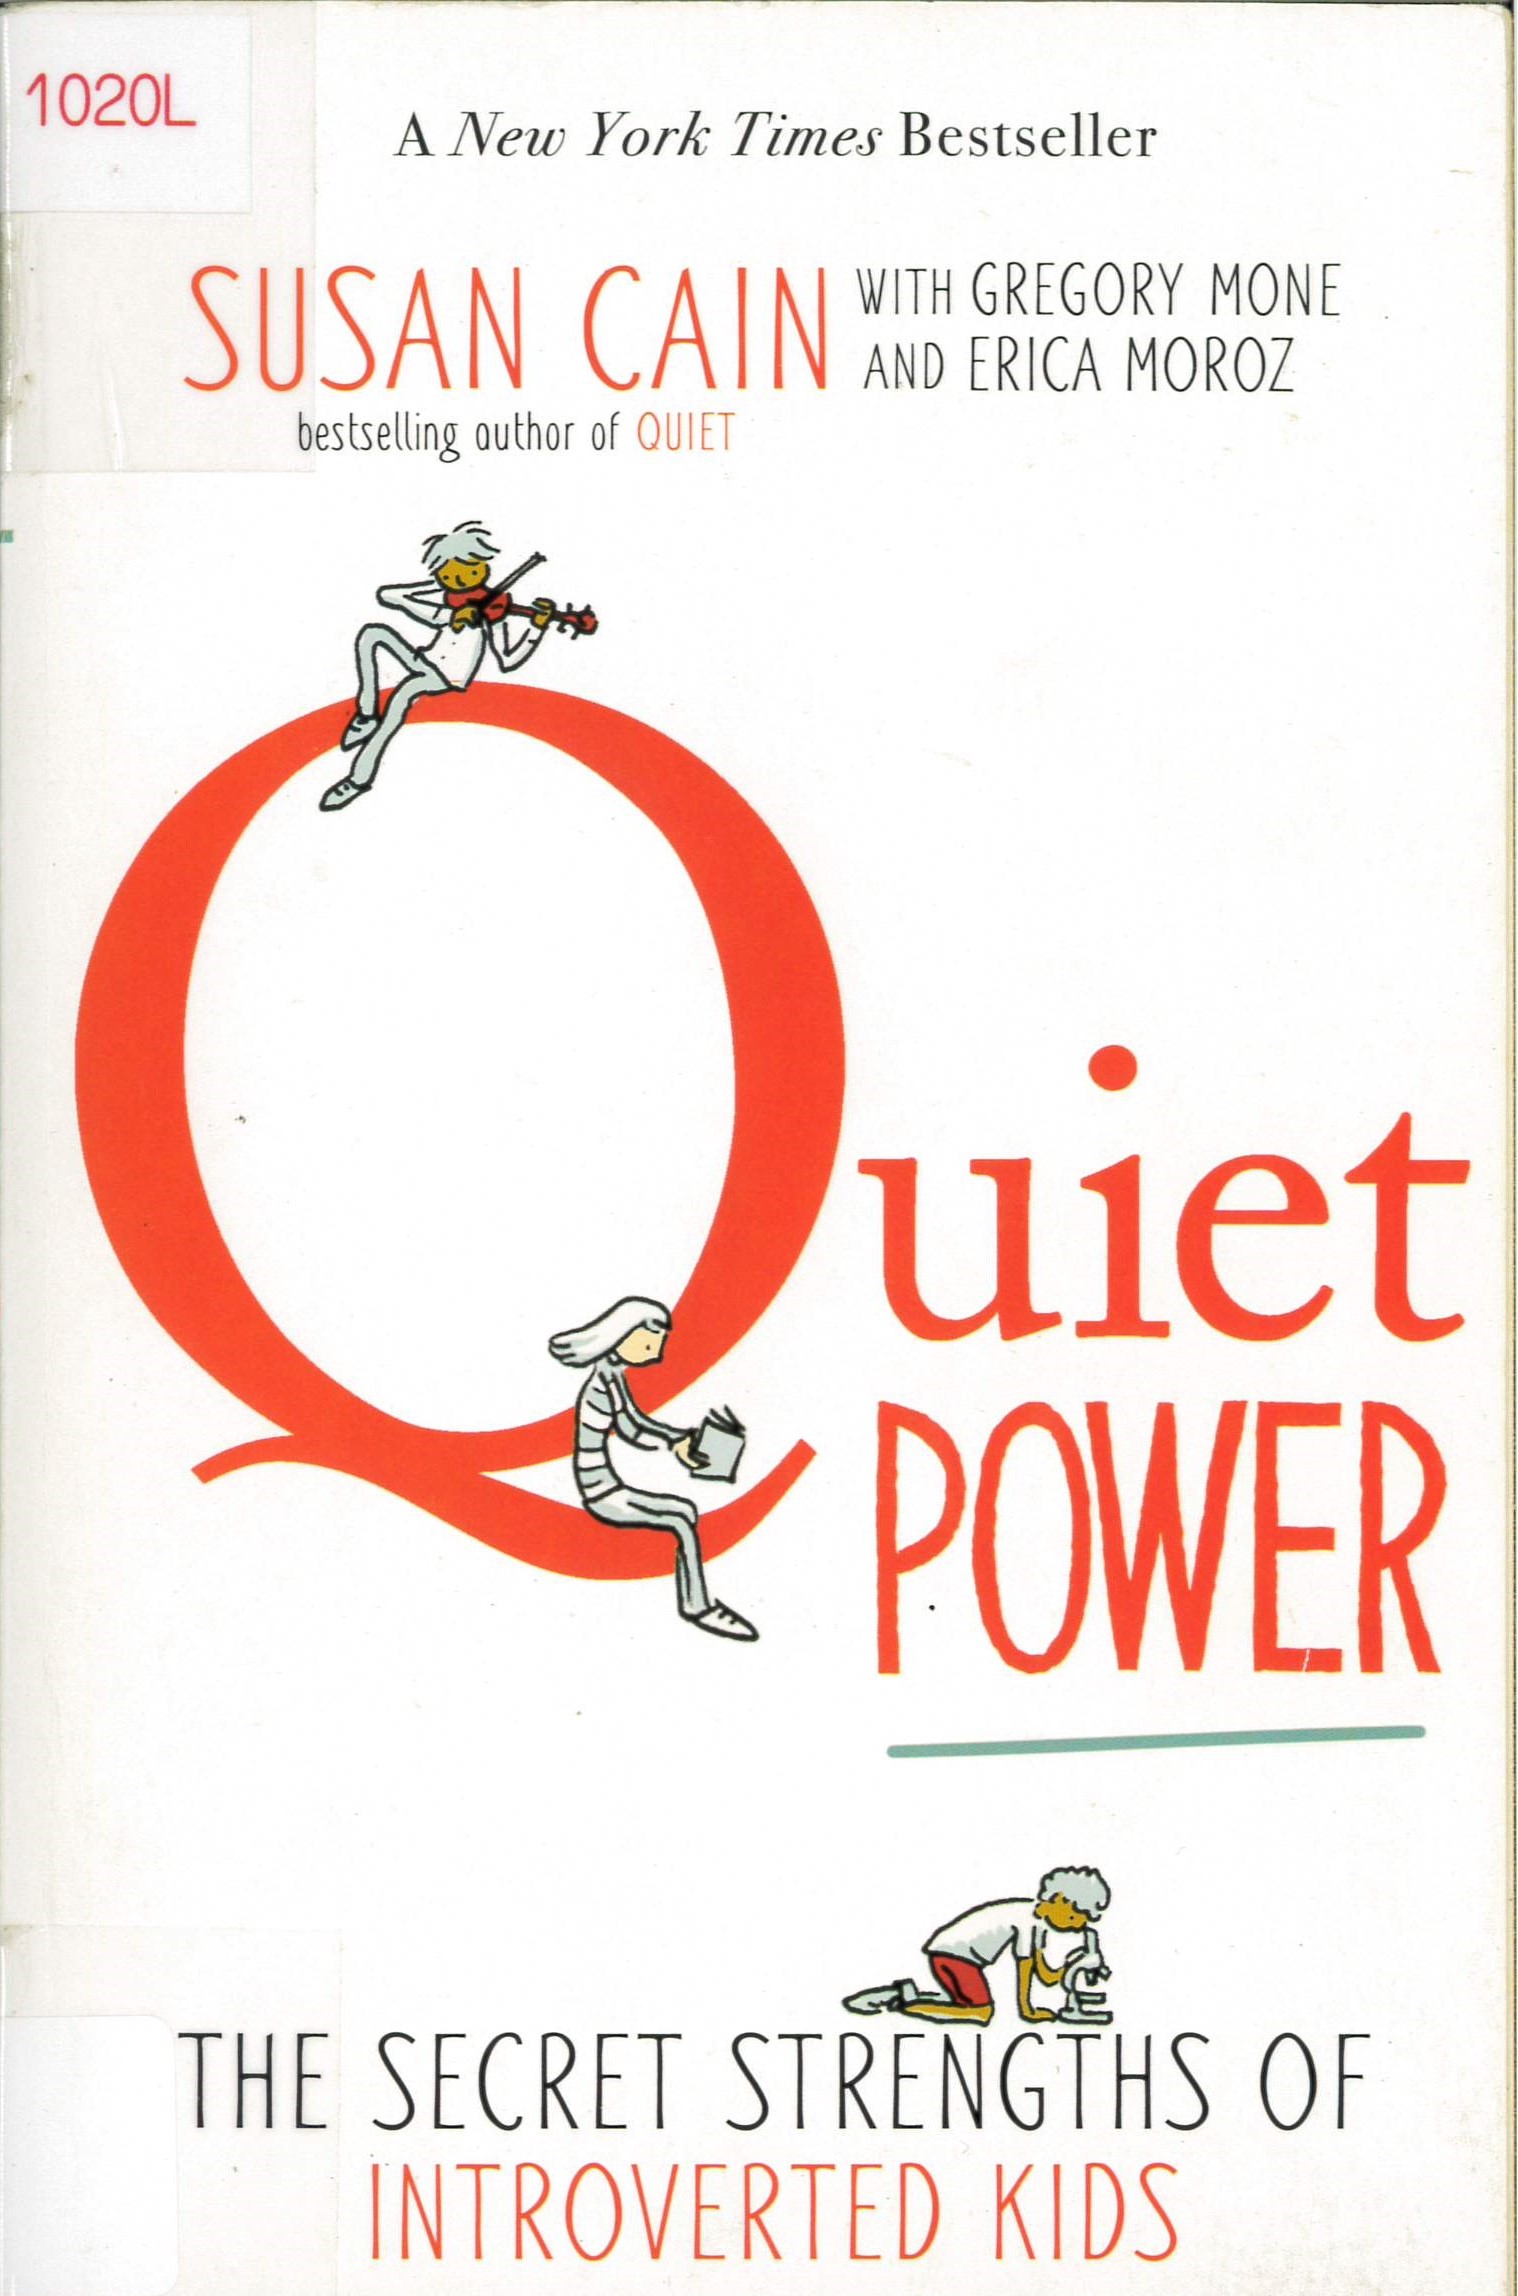 Quiet power : the secret strengths of introverts /